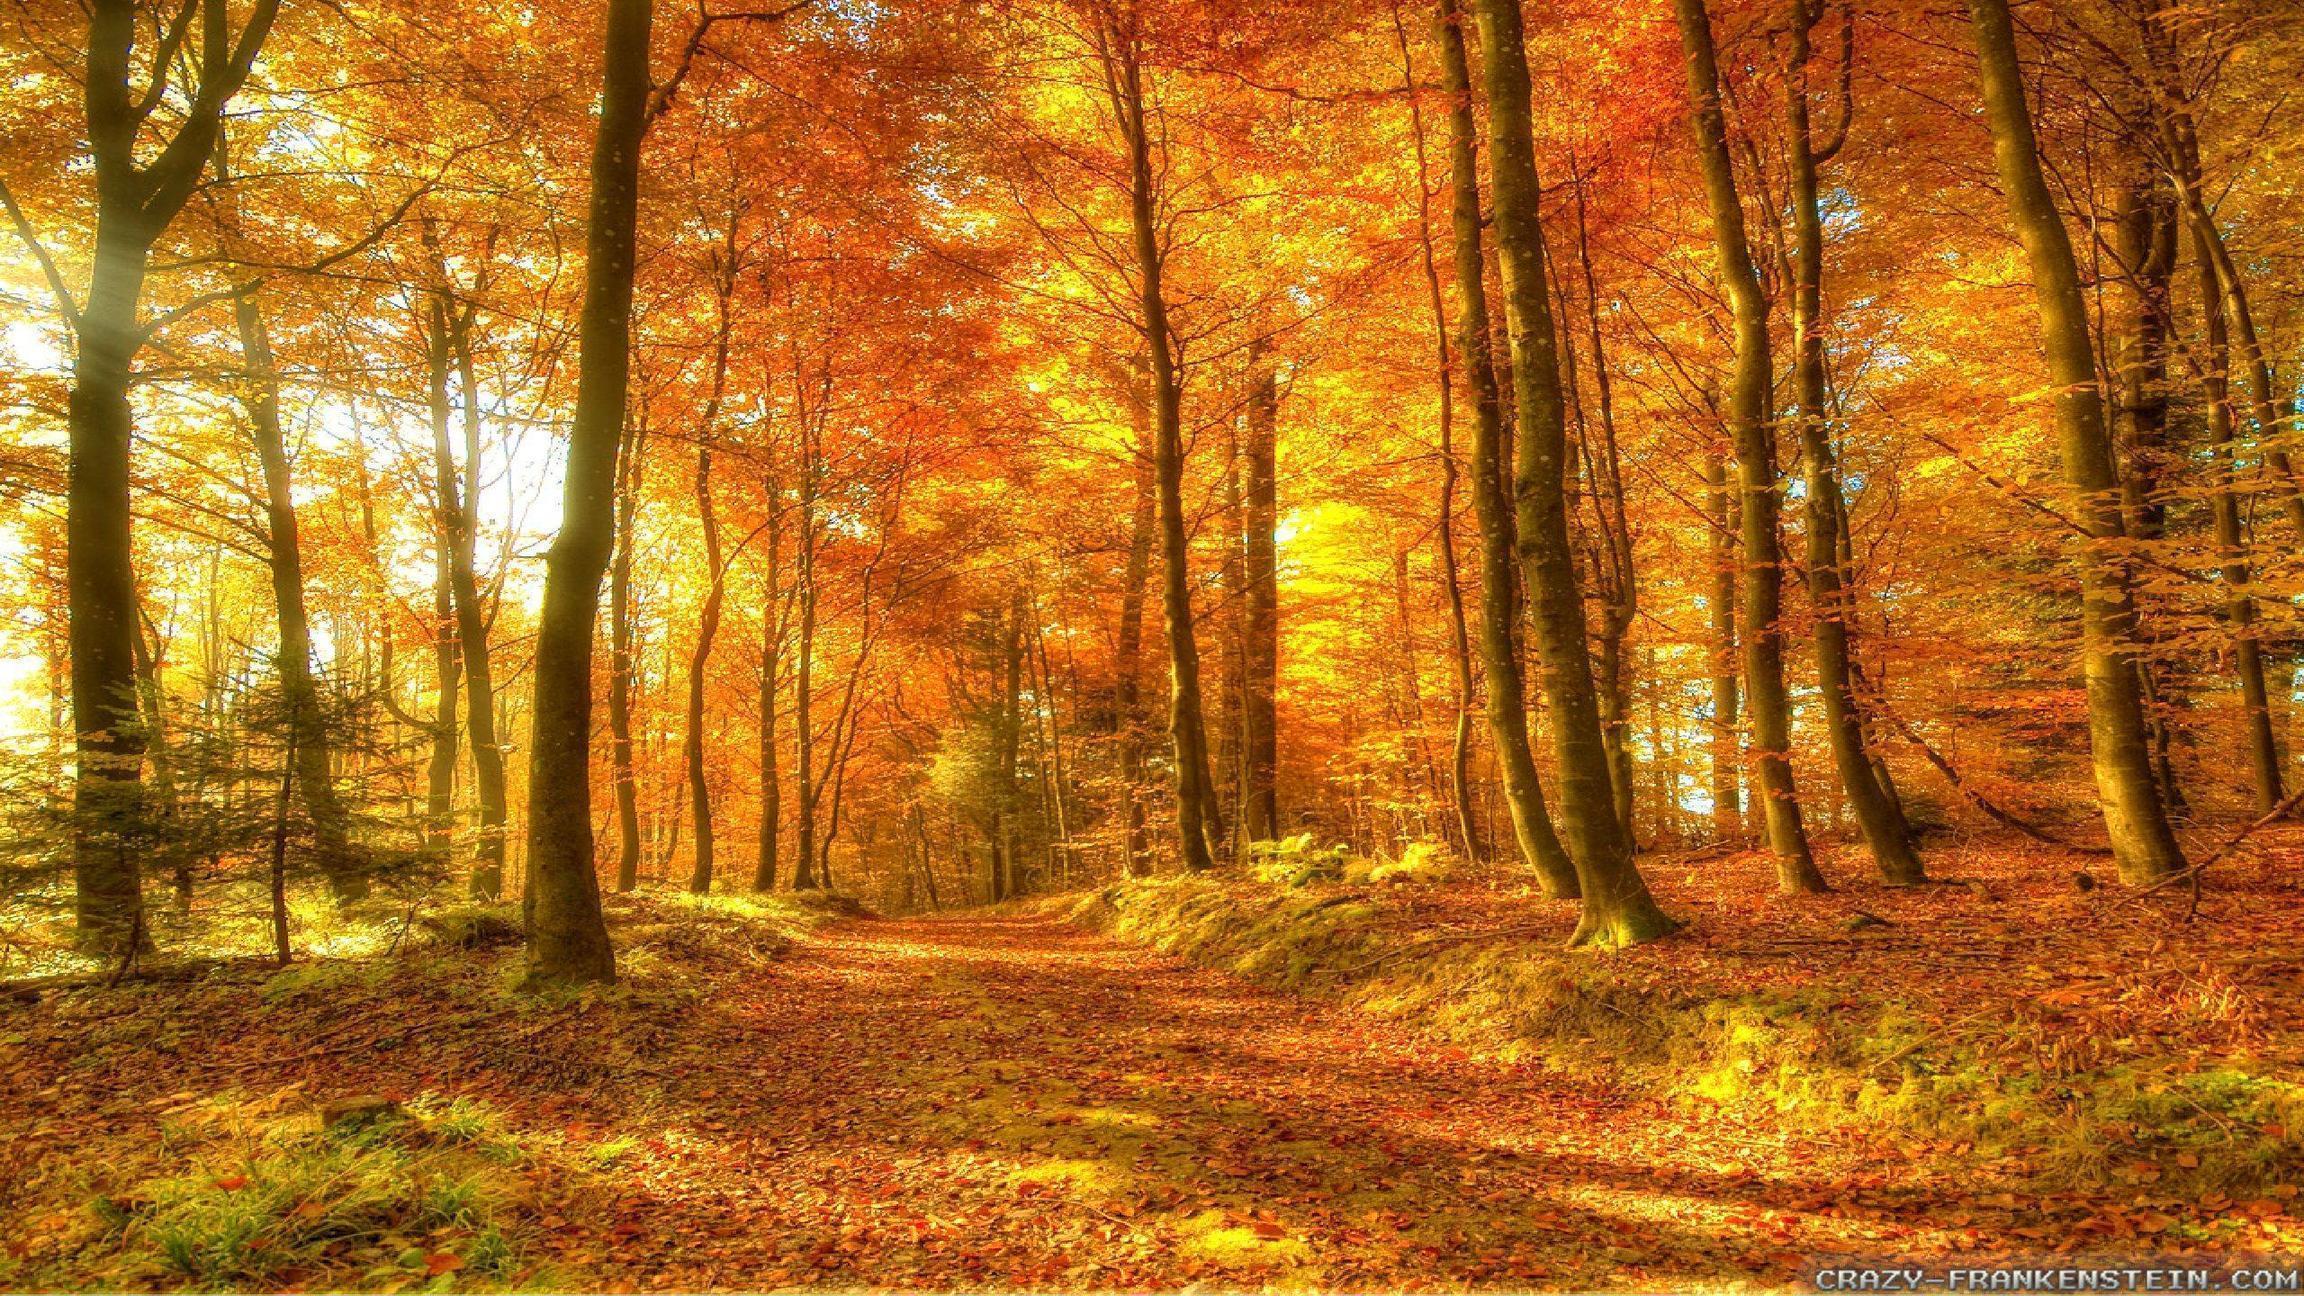 Road In Autumn Woods Wallpaper 2560x1440 px Free Download